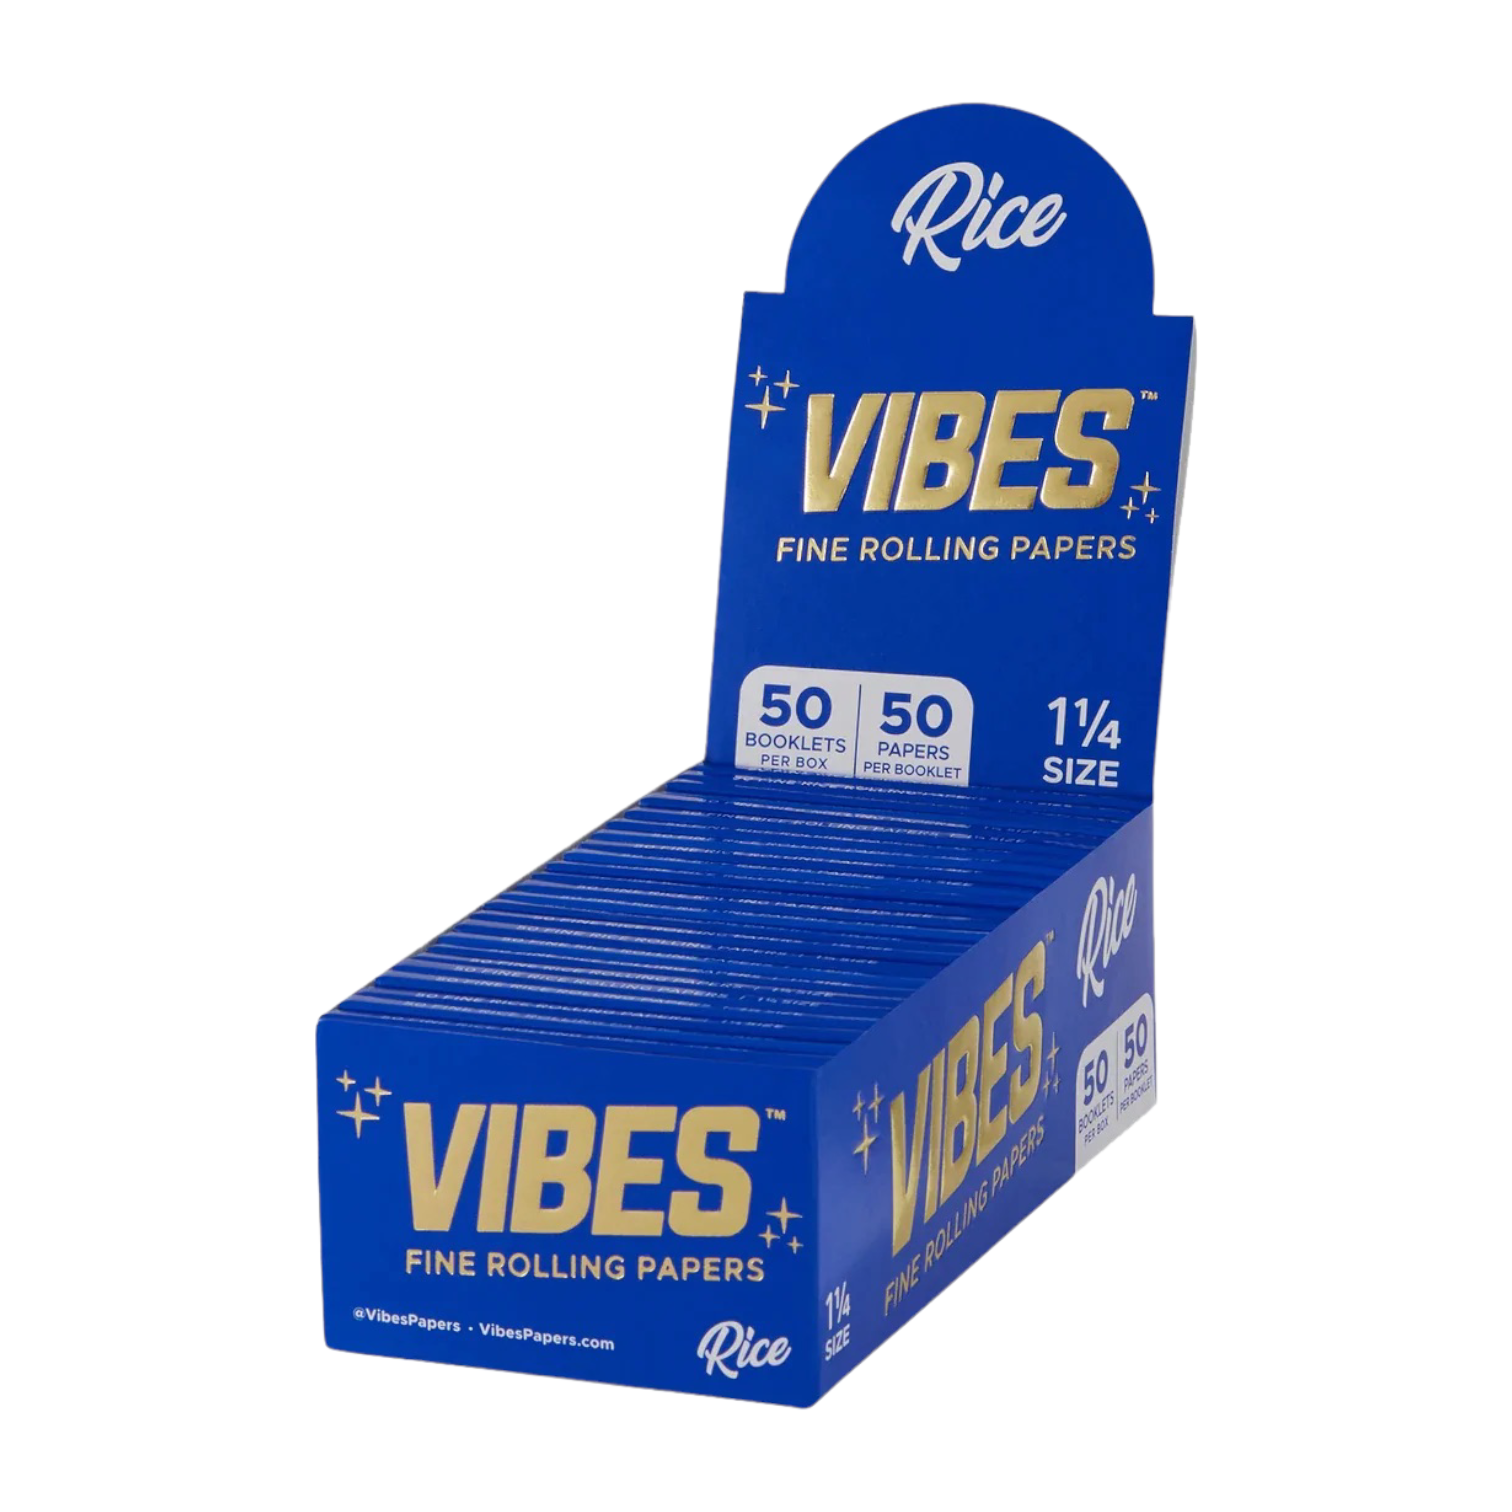 VIBES - BOX Of Rice 1.25 Papers - 50 Pack Box